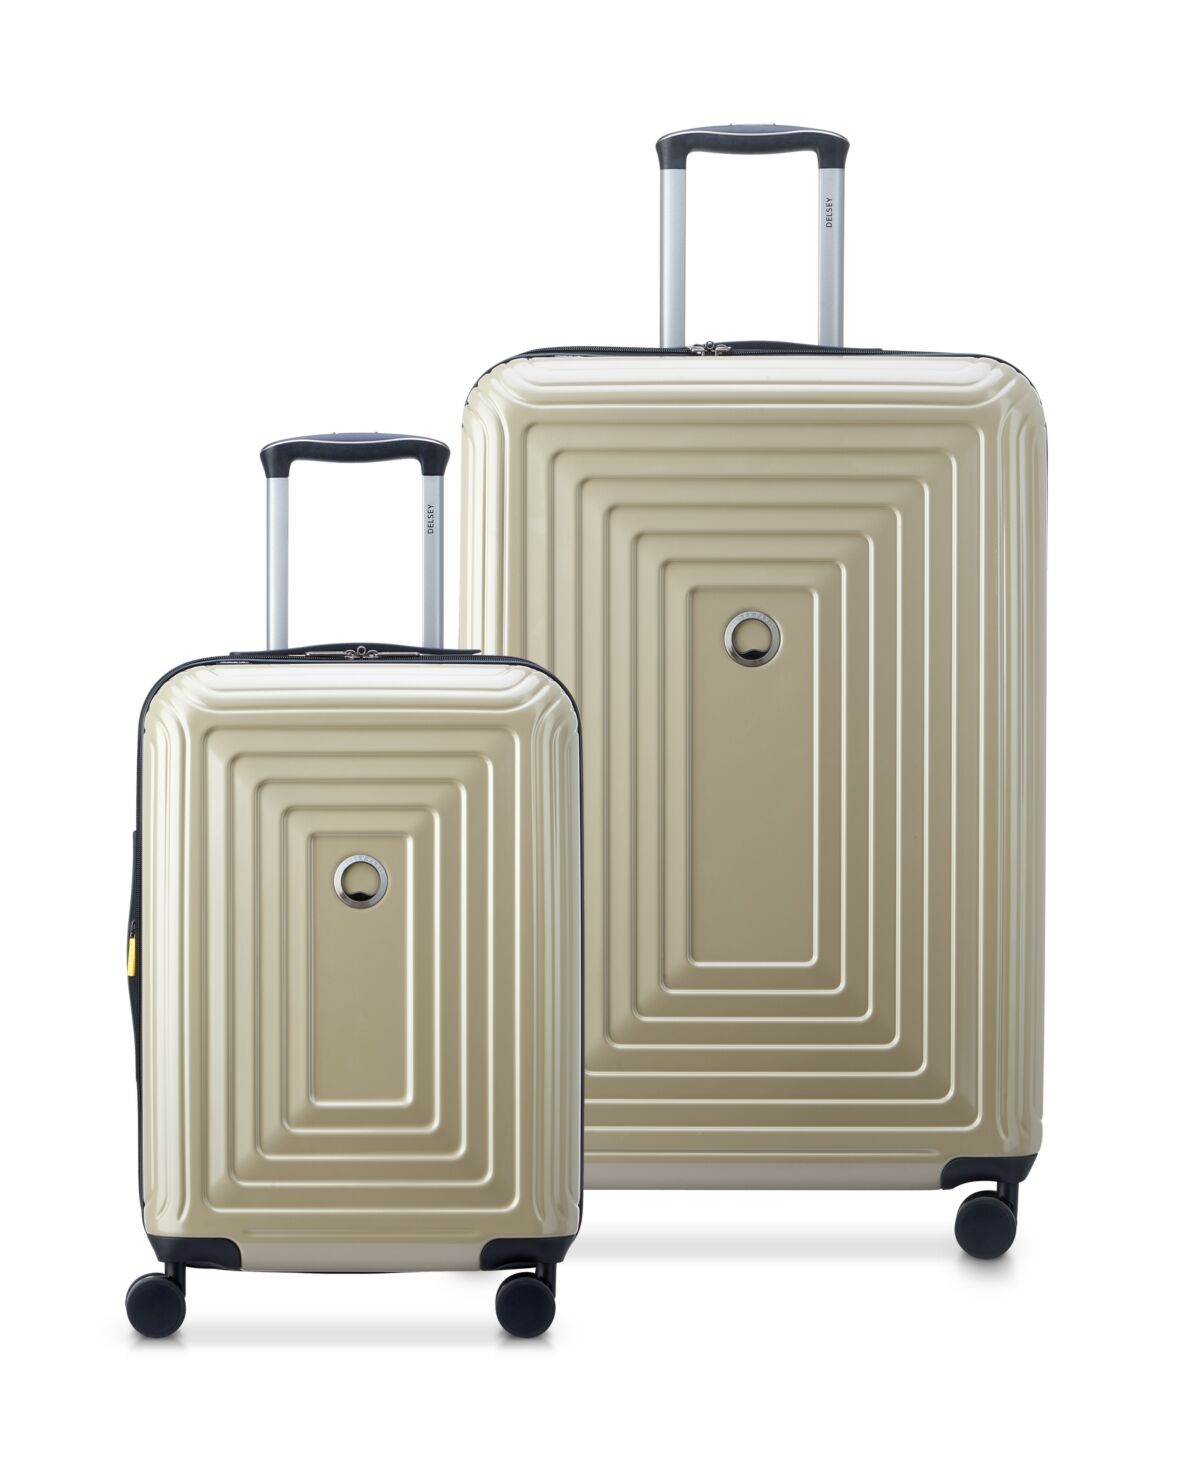 Delsey Corsica 2 Piece Hardside Luggage Set, Carry-On and 27